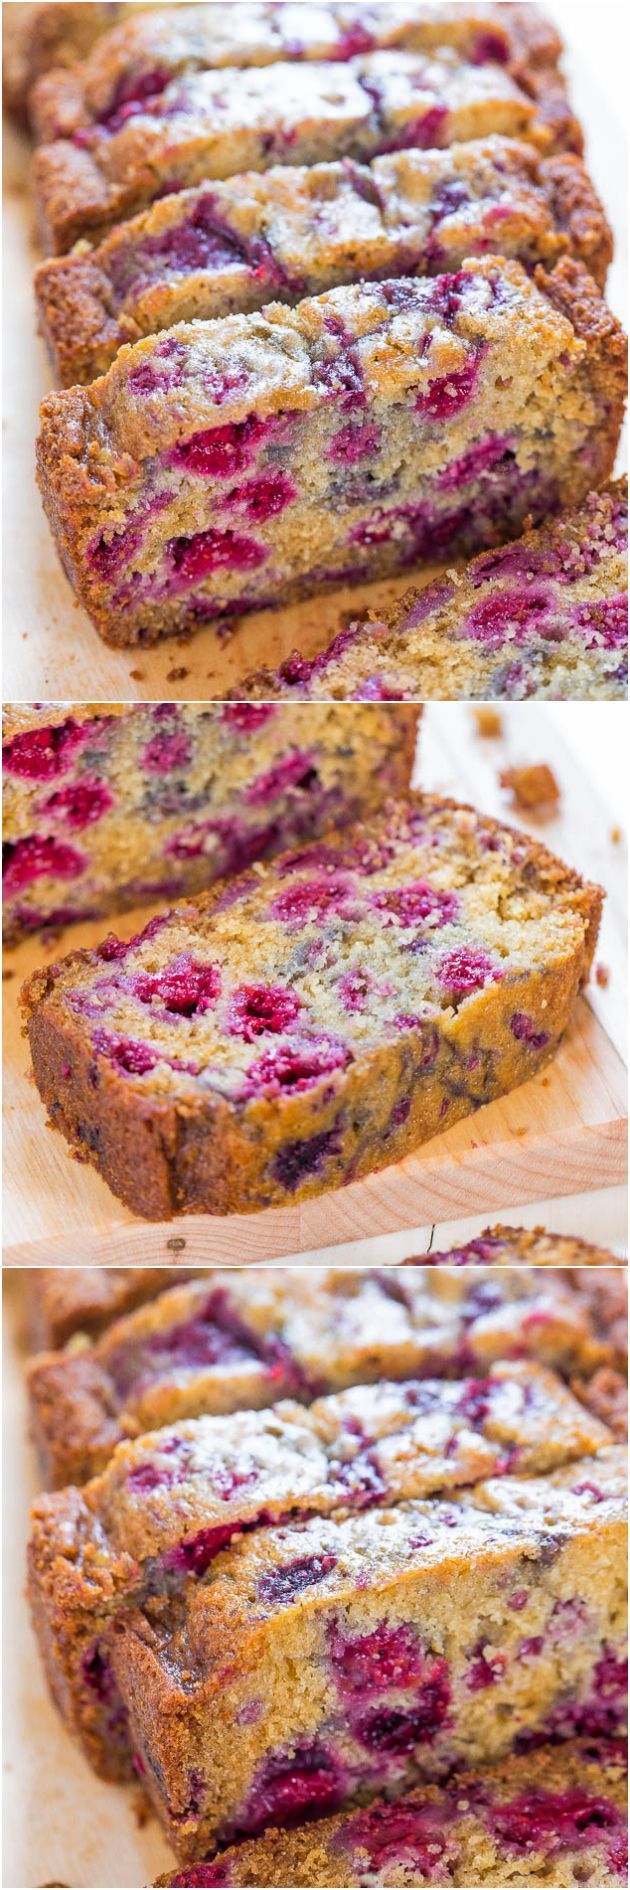 The Best Raspberry Bread – There’s almost more raspberries than bread! Super soft and just bursting with j